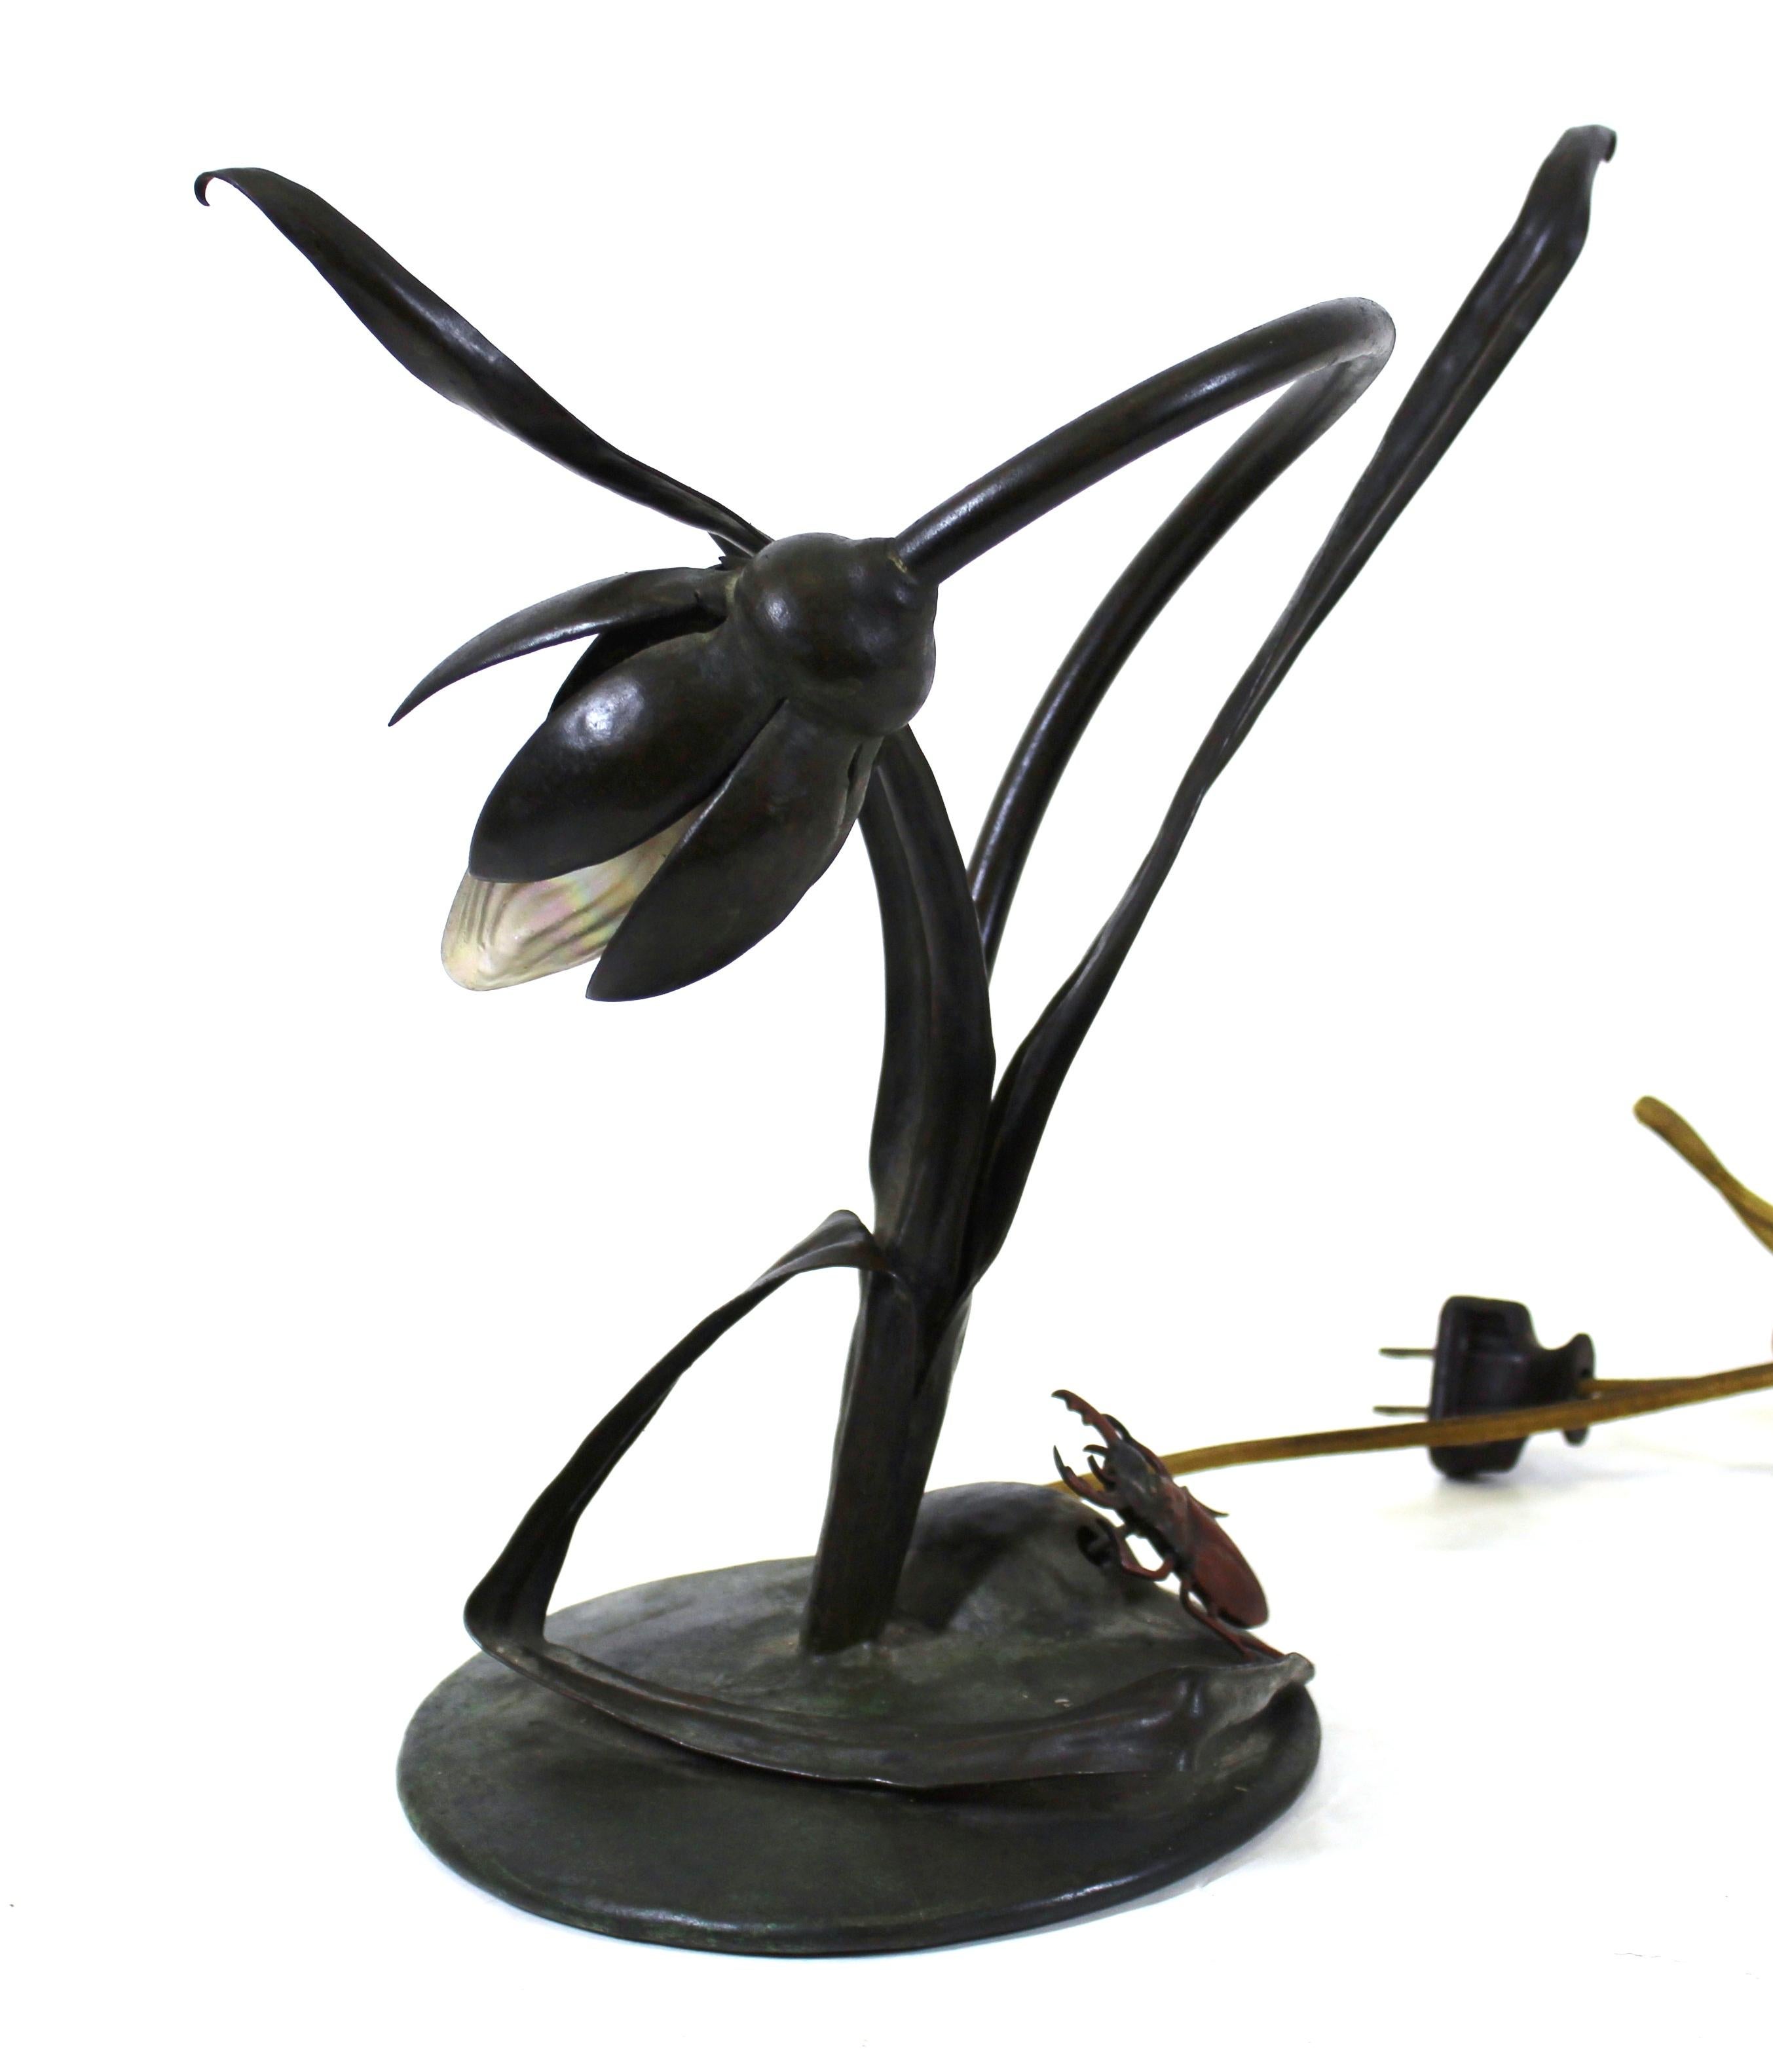 Early 20th Century Japanese Art Nouveau Floral Table Lamp with Beetle Light Switch